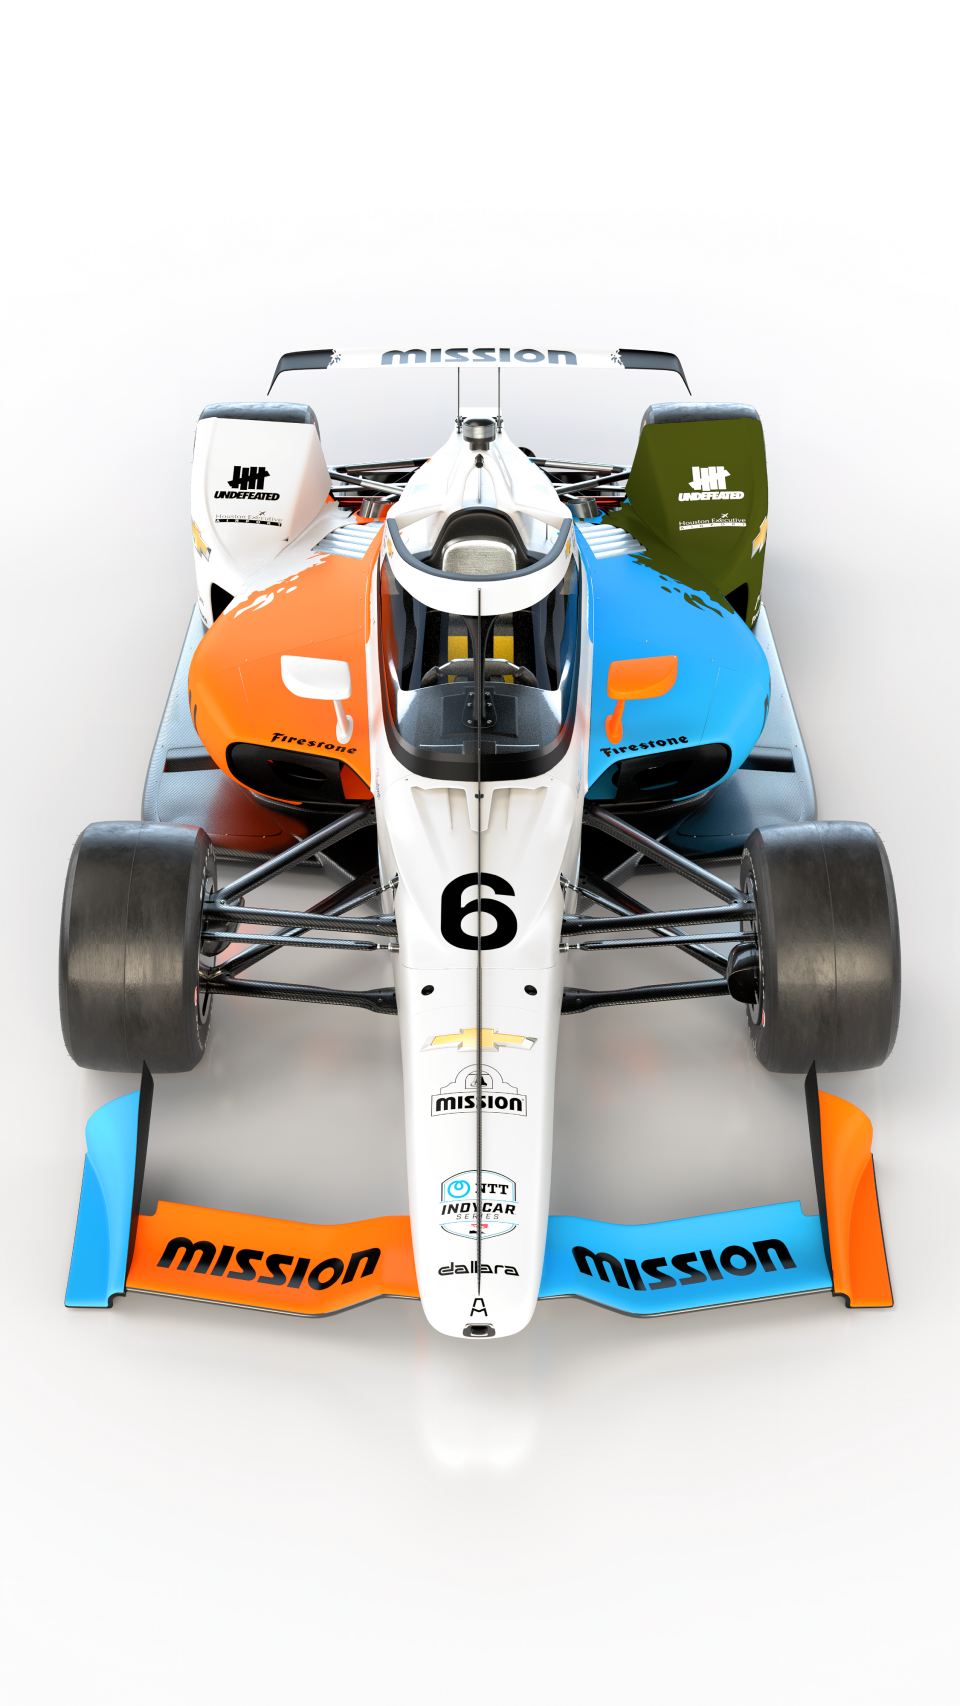 Arrow McLaren SP continued its livery design partnership with clothing brand UNDEFEATED, this year expanding to all three of the team's Indy 500 cars. Pictured here is Juan Pablo Montoya's No. 6 Chevy for the May 29 race.